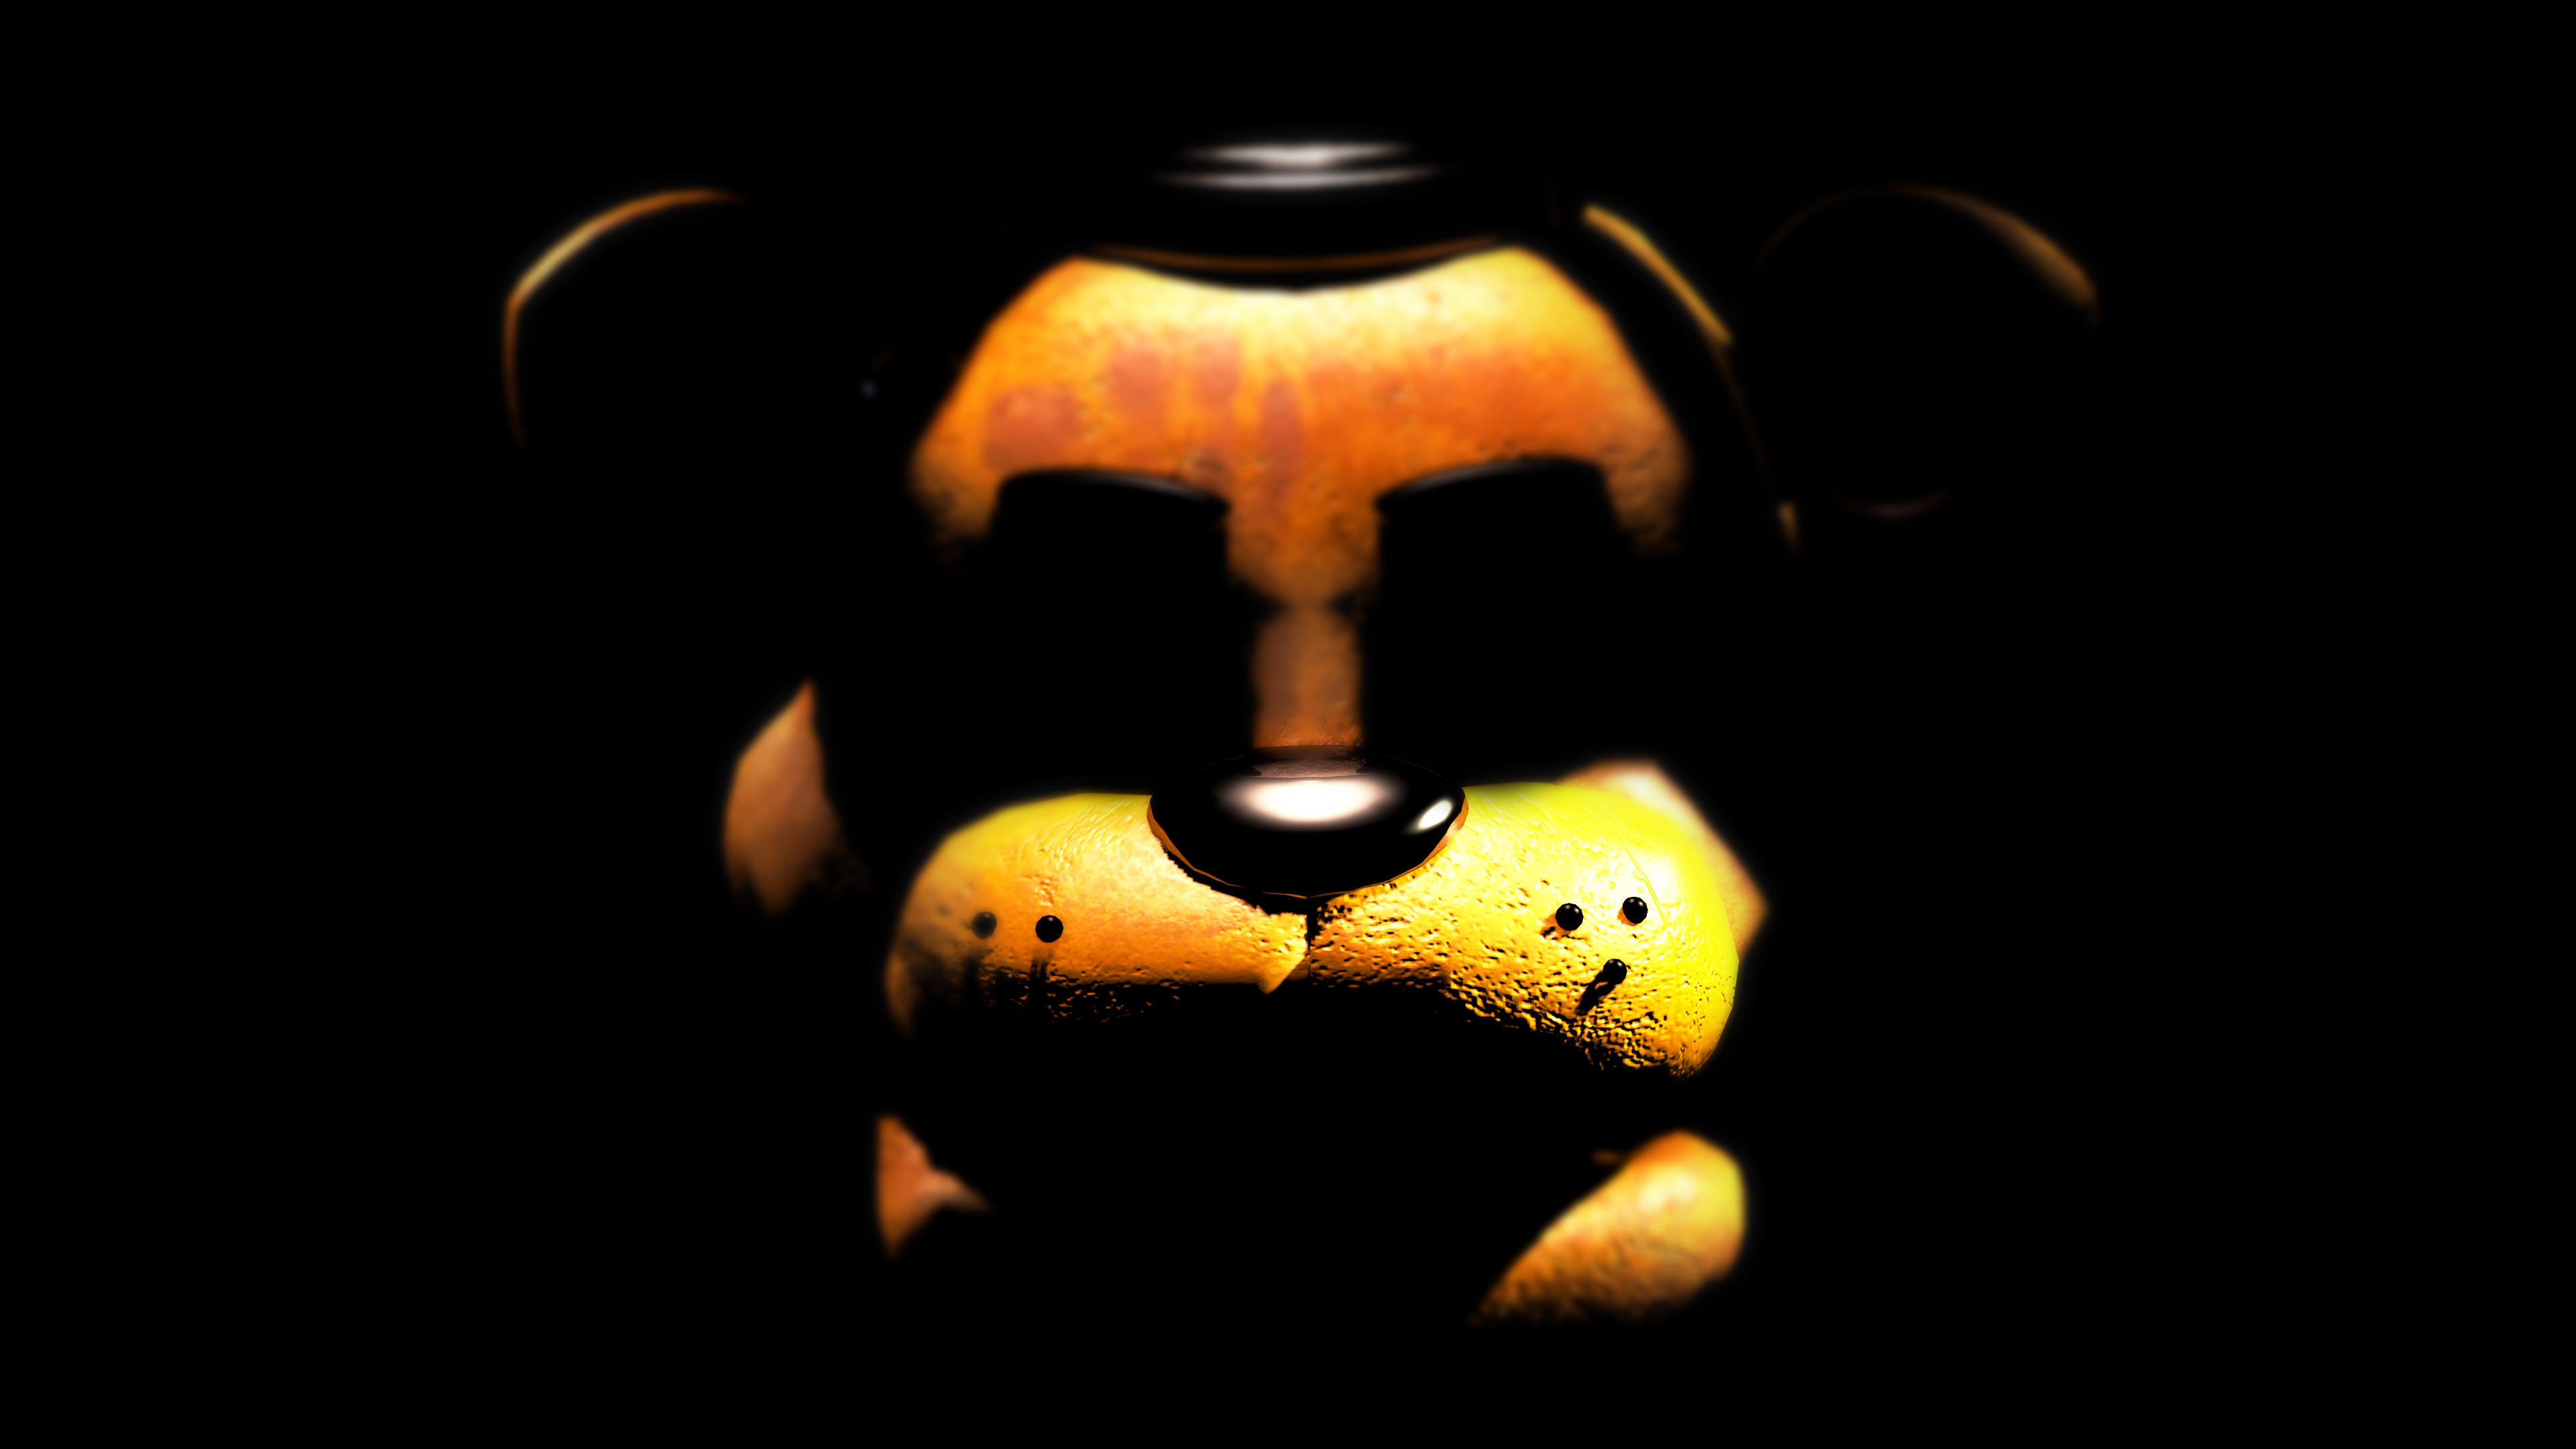 Five Nights at Freddys Poster / Wallpaper by GravityPro